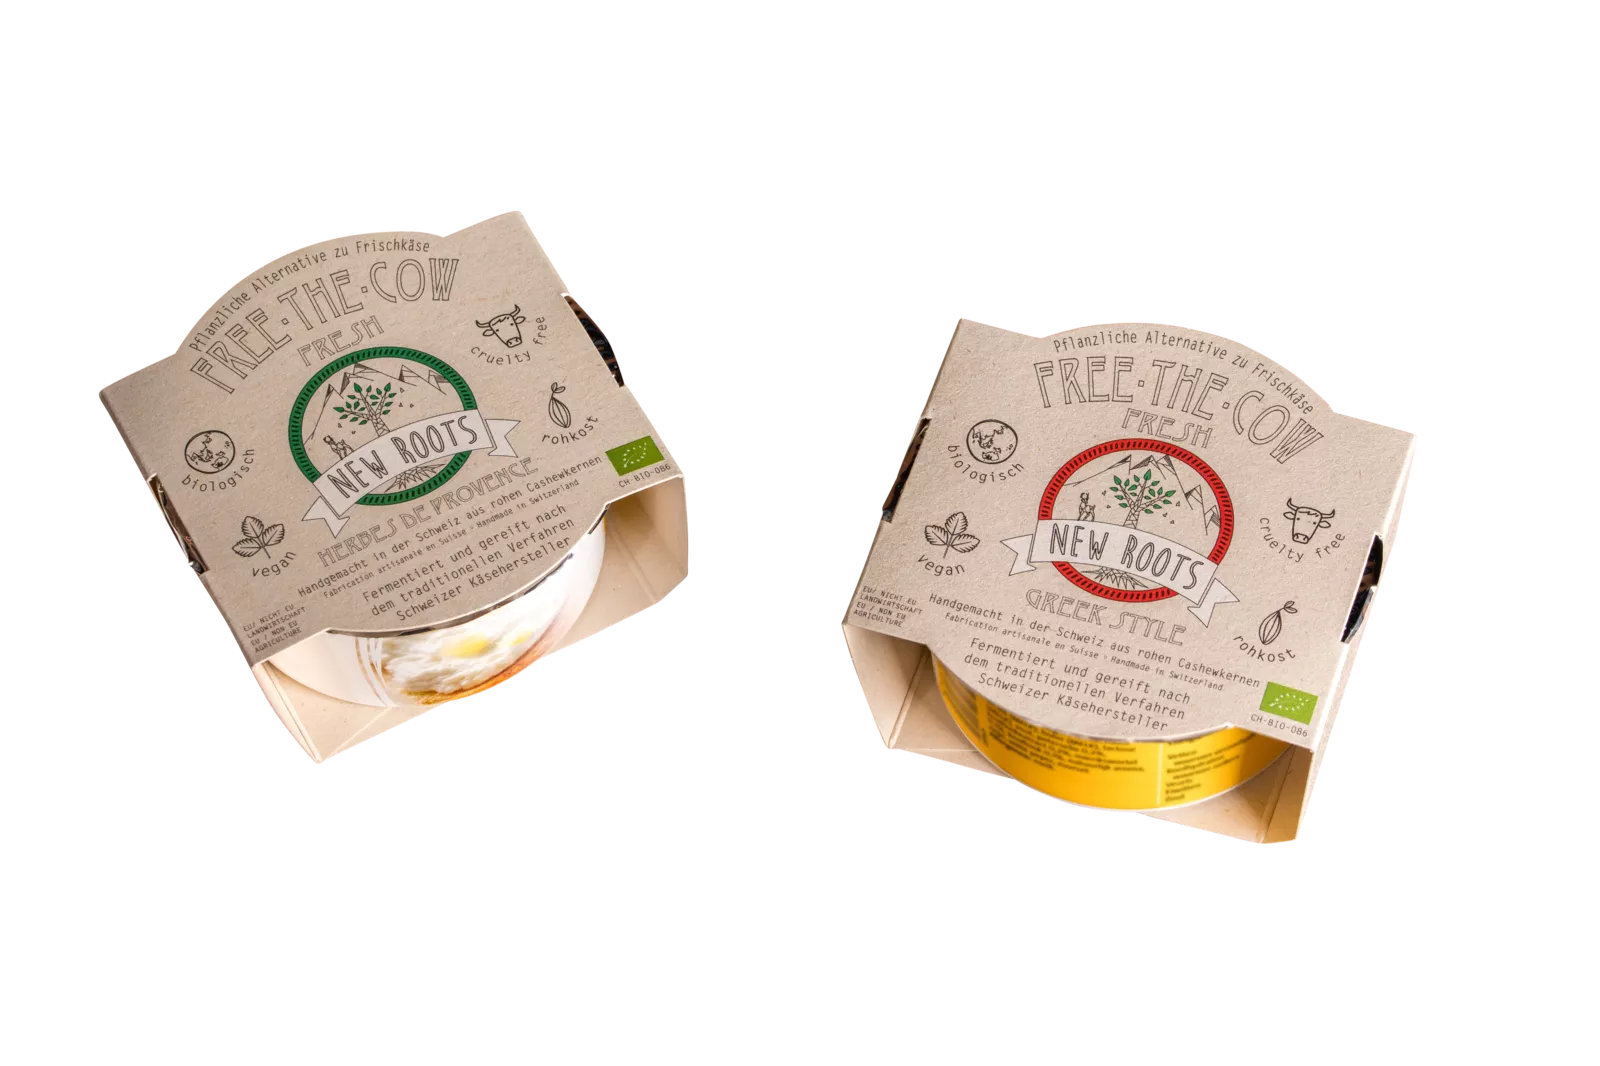 PaperWise eco friendly packaging sustainable paper board vegan bio organic natural Frischkase c